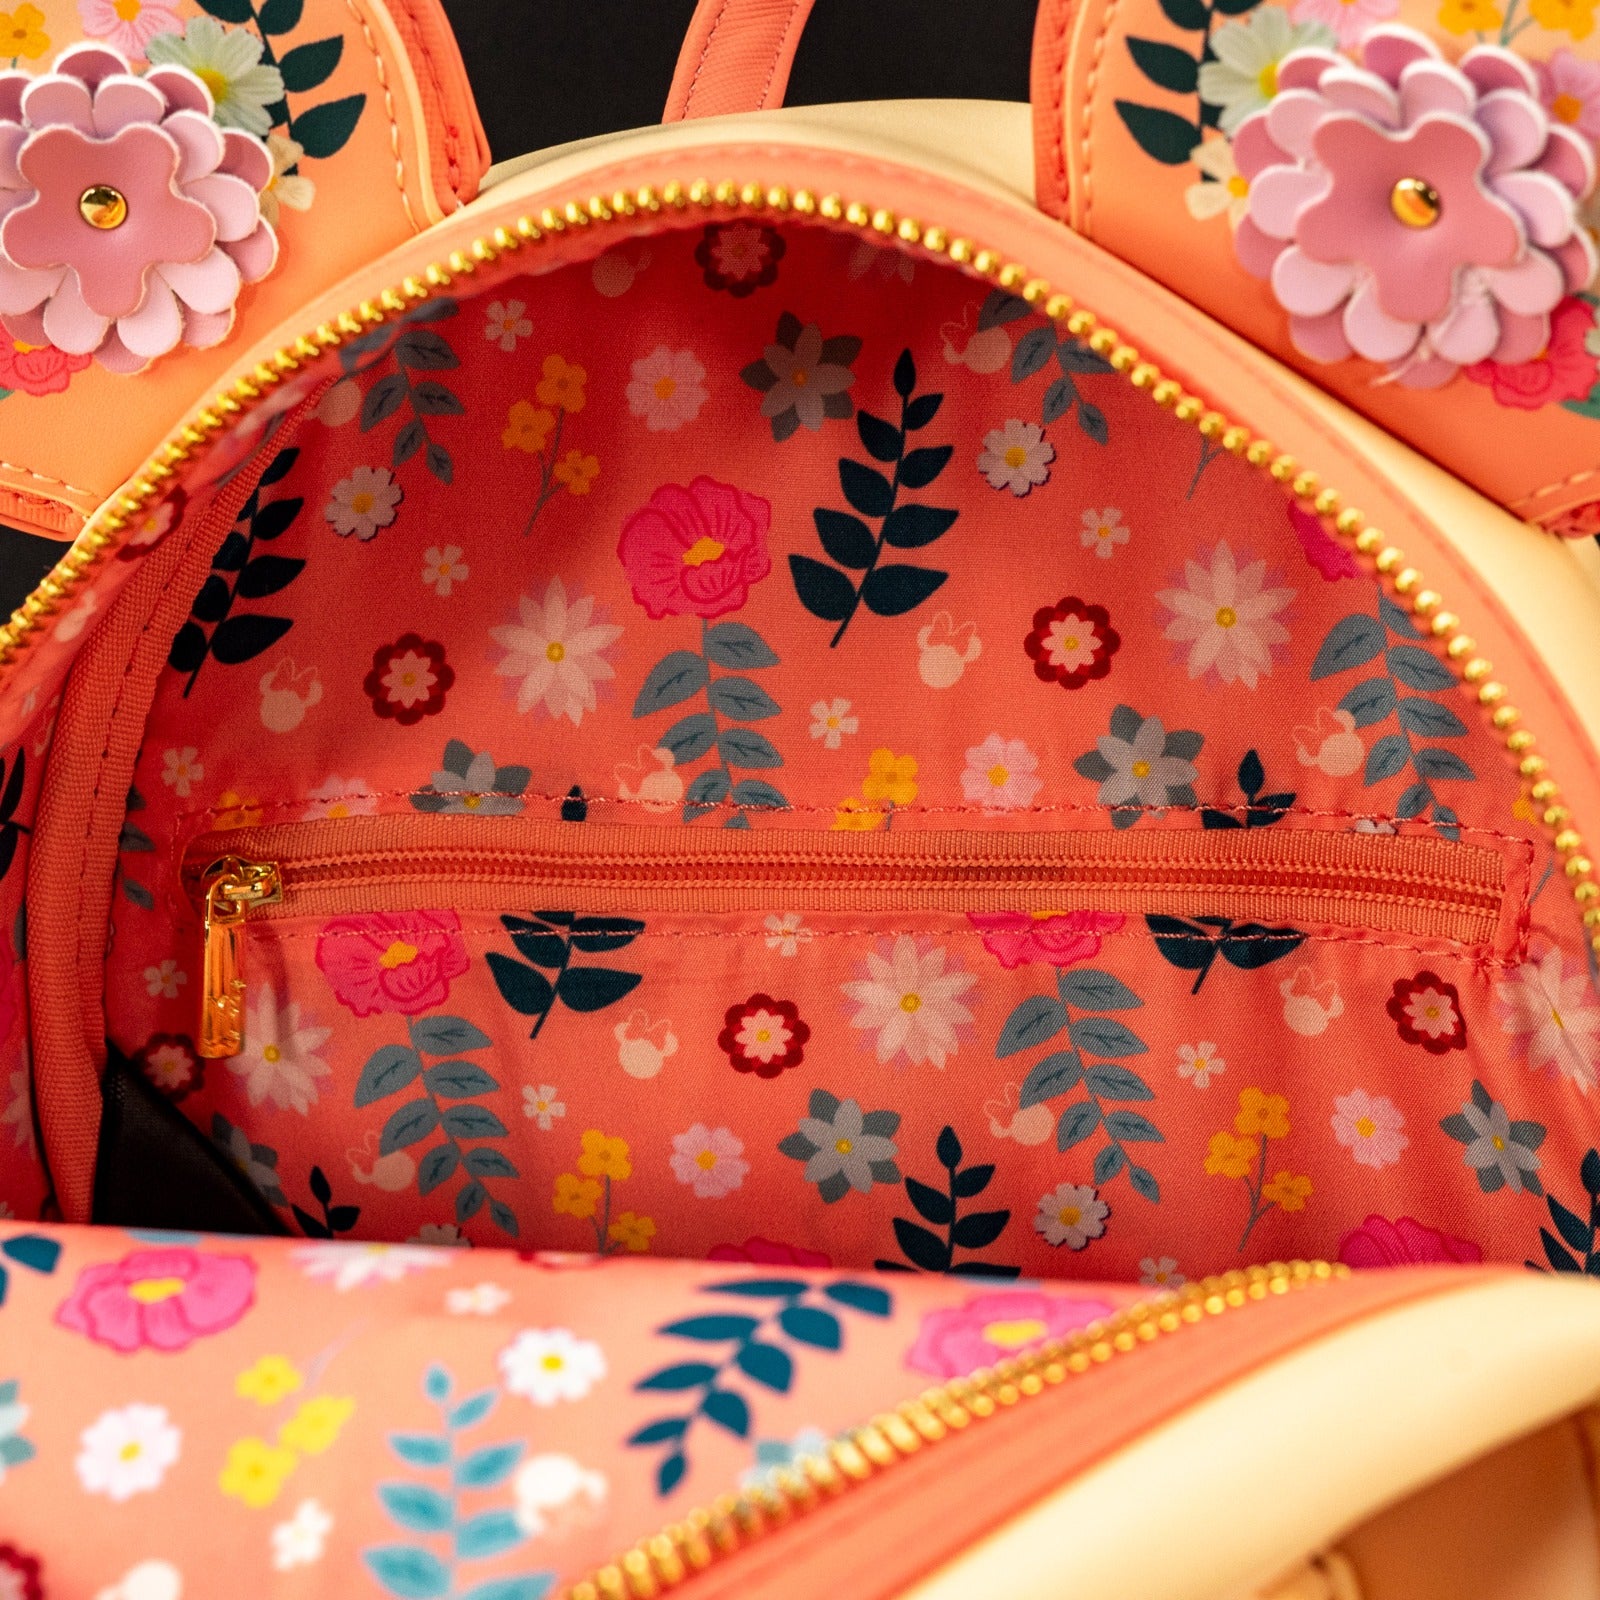 Loungefly x Disney Minnie Mouse Peach Floral Mini Backpack